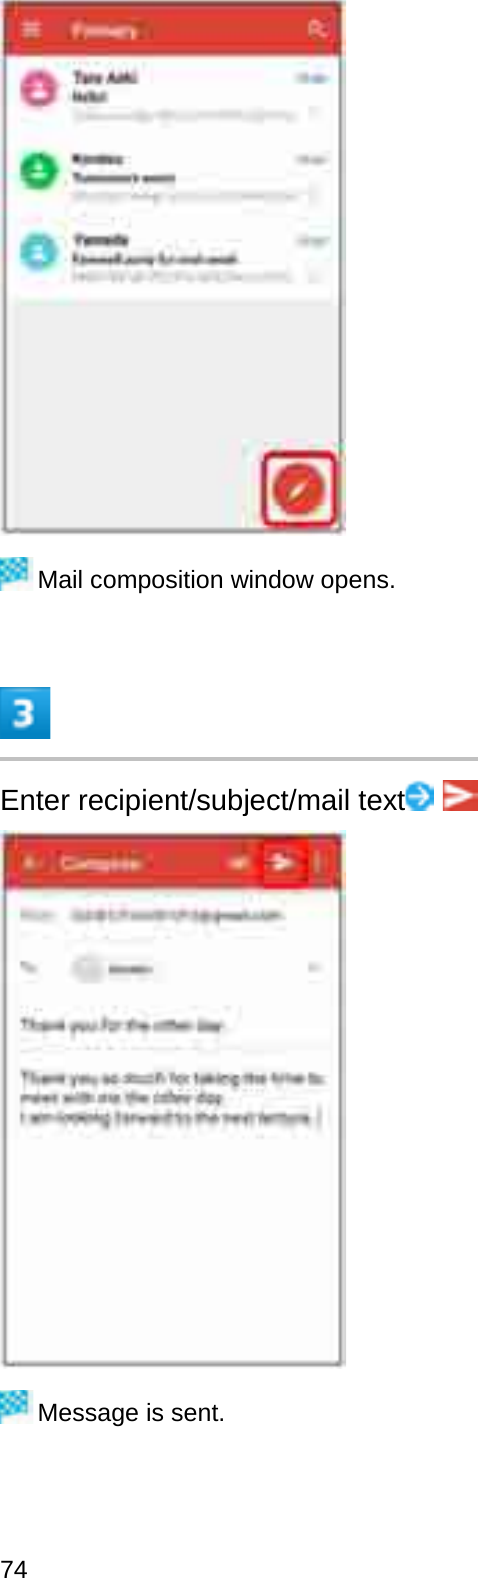 Mail composition window opens.Enter recipient/subject/mail textMessage is sent.74